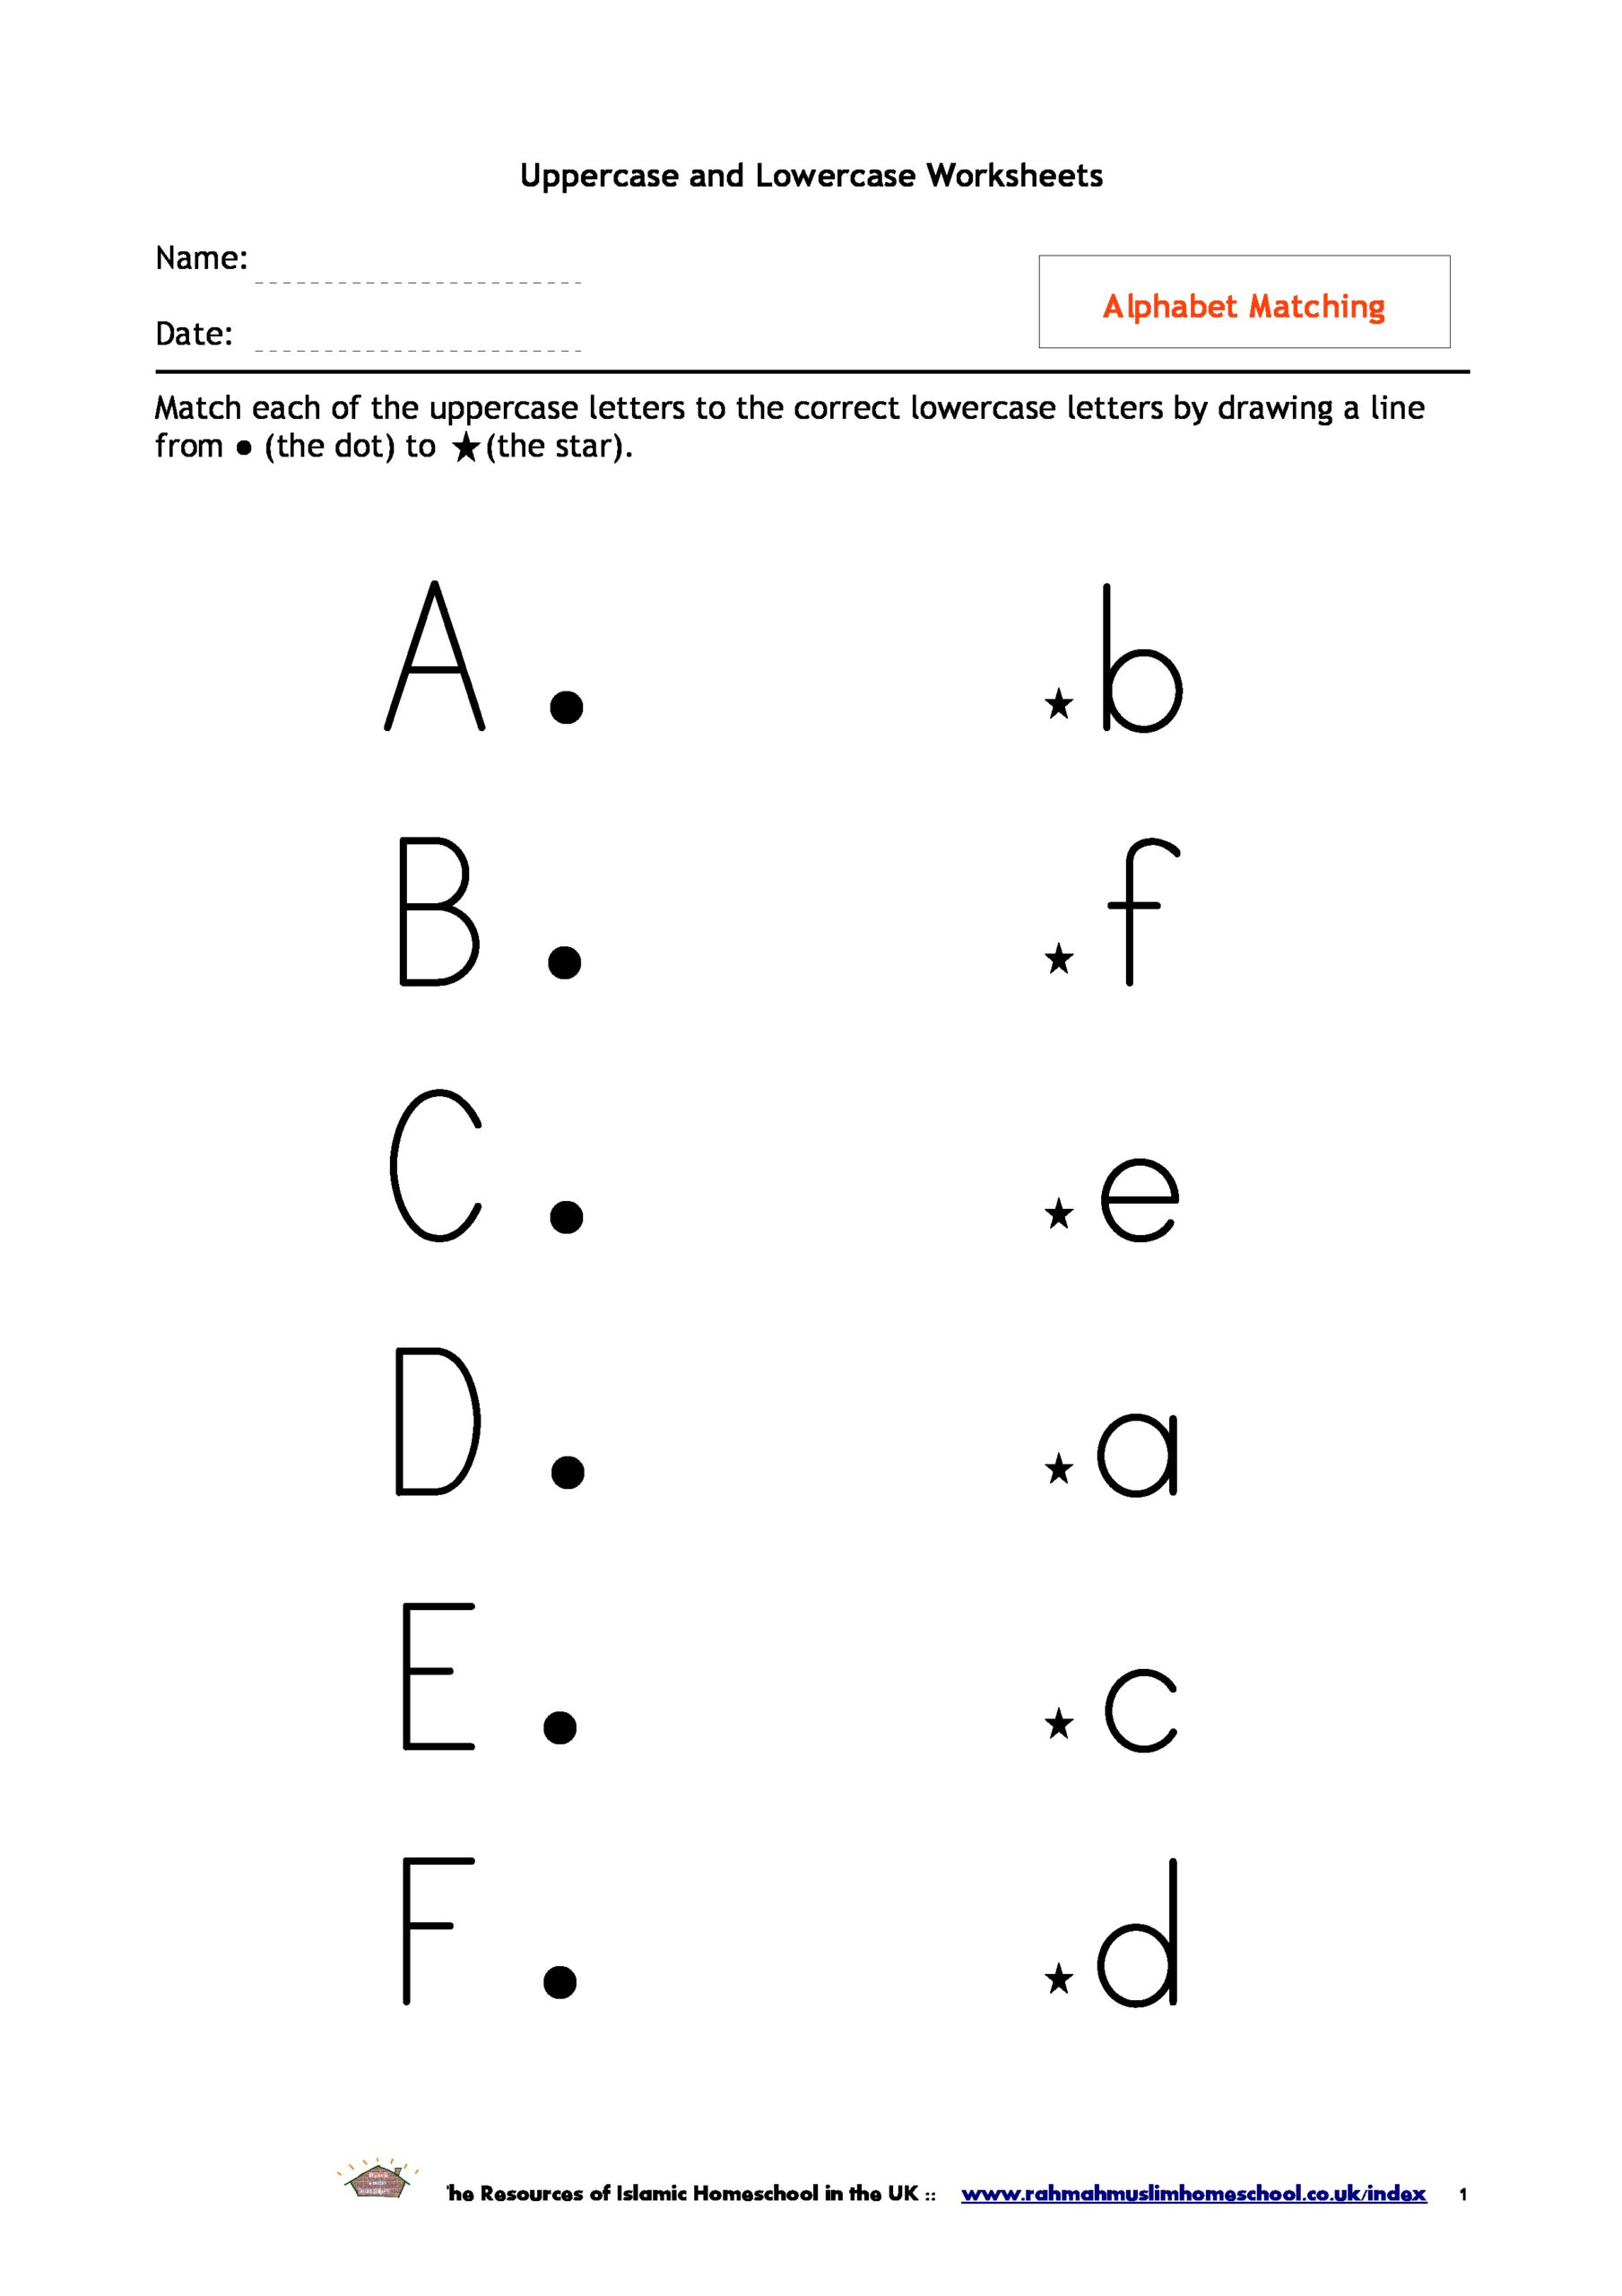 Alphabet Matching Worksheets | The Resources Of Islamic with regard to Alphabet Quiz Worksheets